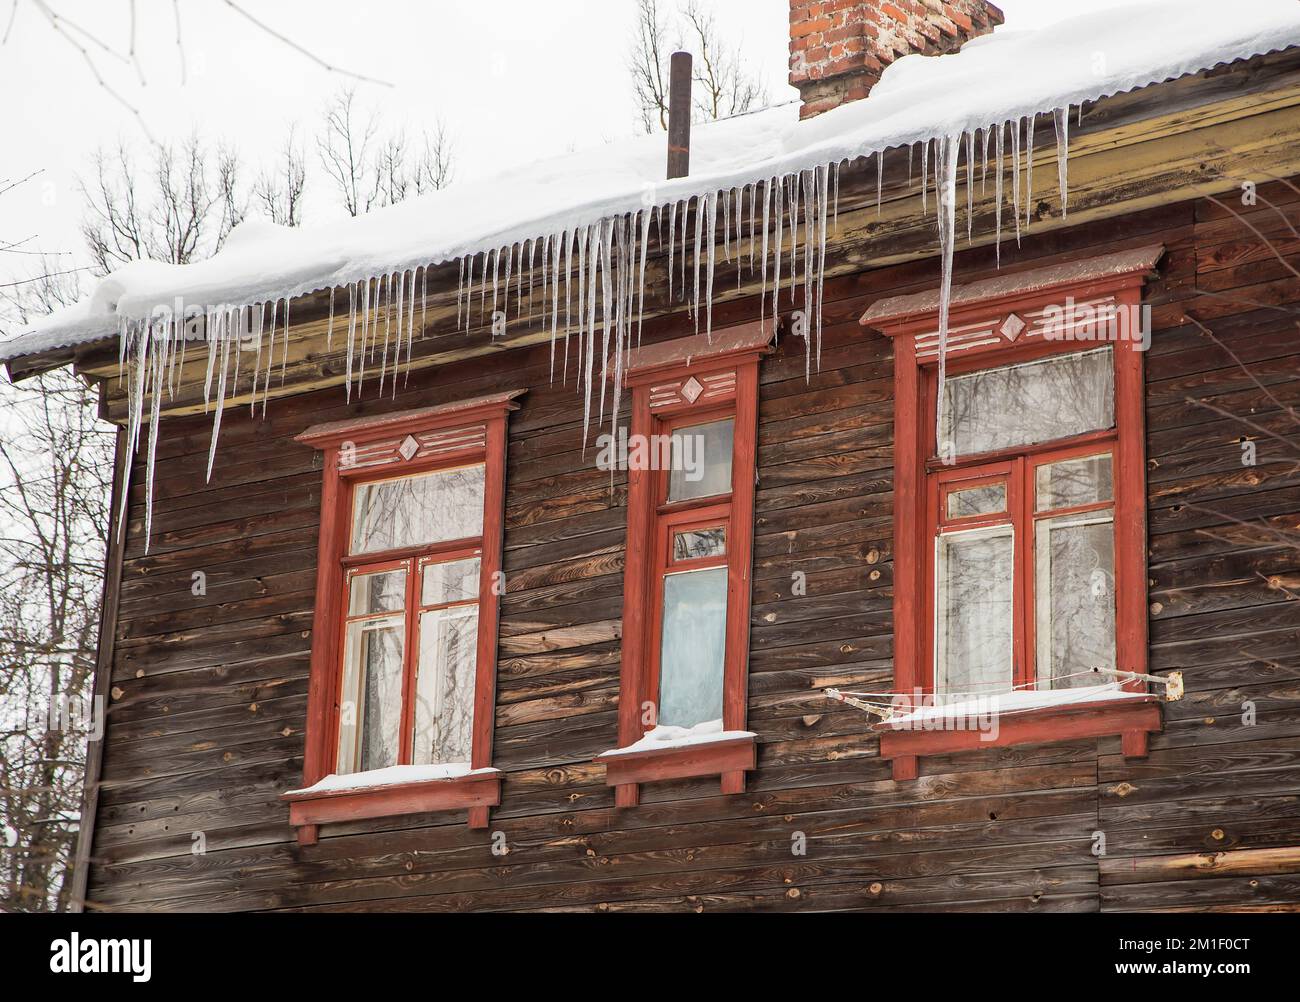 Icy, long icicles hang on the edge of the roof, winter or spring. Plank wall of an old wooden house with windows. Large cascades of icicles in smooth, beautiful rows. Cloudy winter day, soft light. Stock Photo